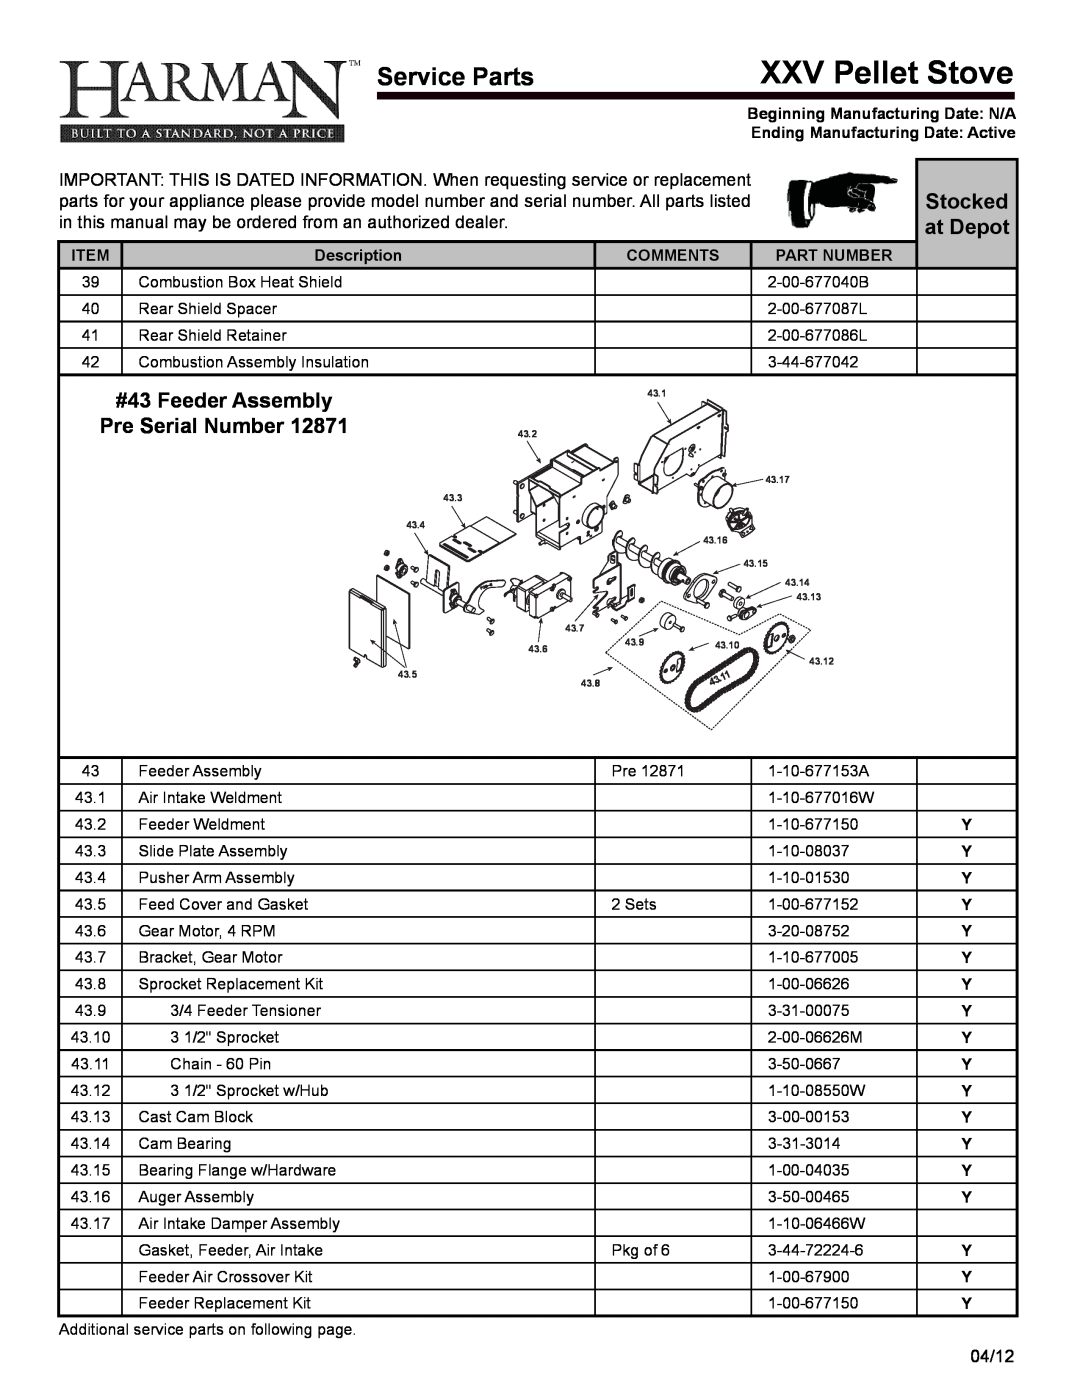 Harman Stove Company R16 manual XXV Pellet Stove, Service Parts, Stocked, at depot, #43 Feeder assembly, Pre Serial number 